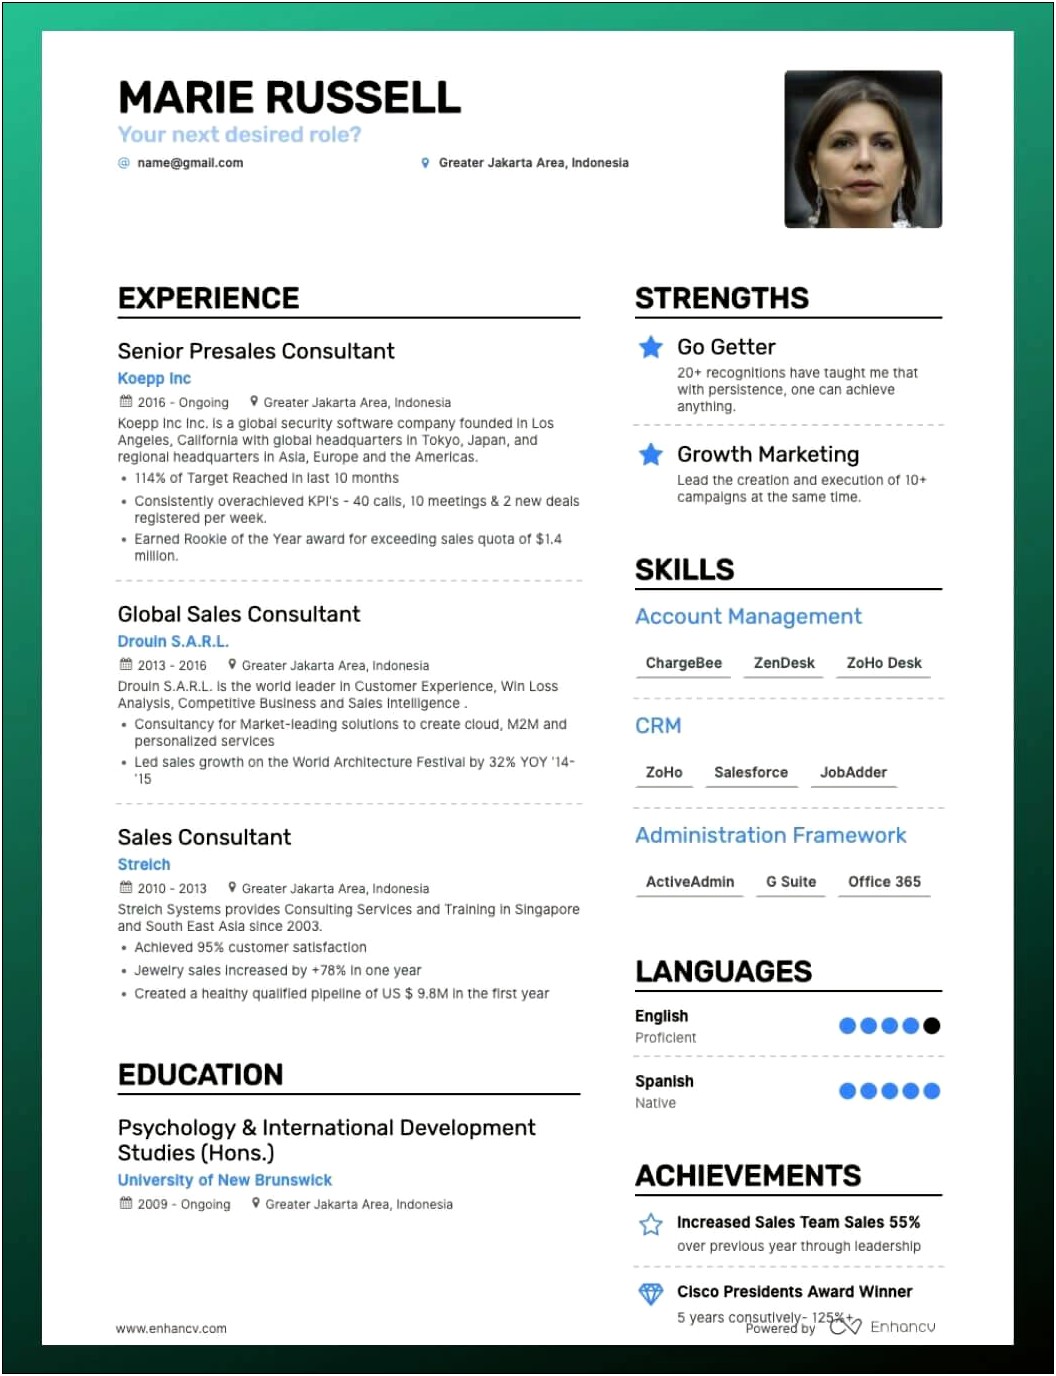 Resume Writing The Skills Sections